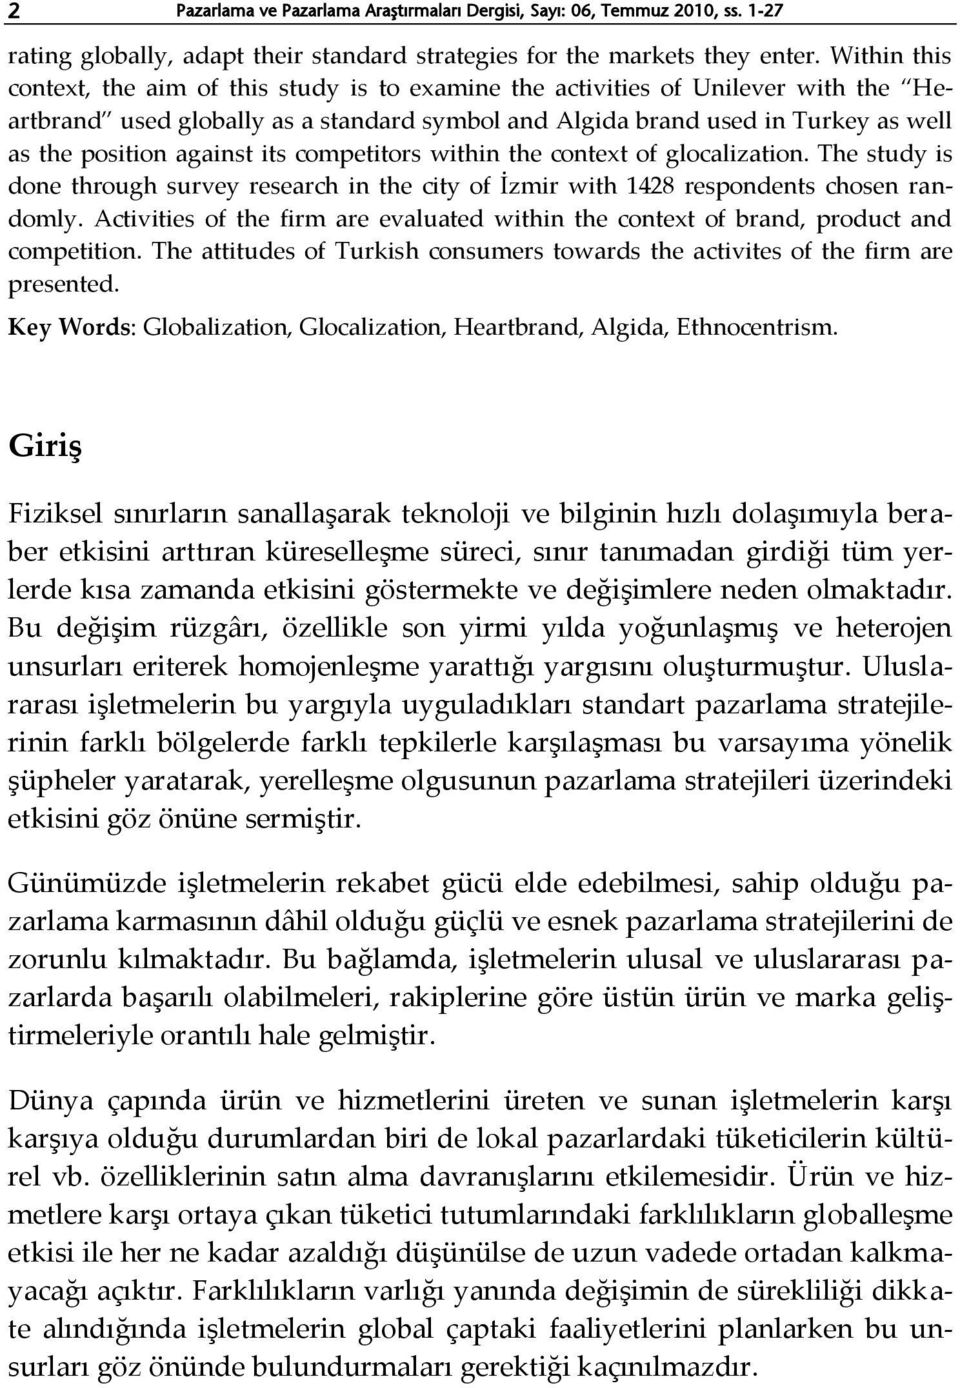 against its competitors within the context of glocalization. The study is done through survey research in the city of İzmir with 1428 respondents chosen randomly.